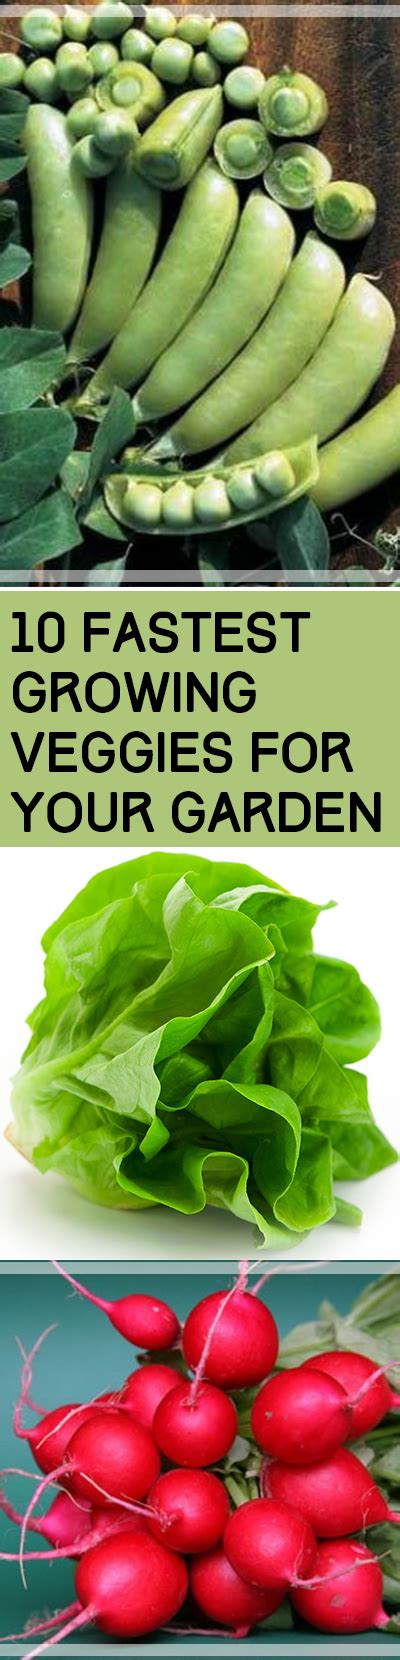 Spinach is an incredibly healthy green leafy vegetable well known for its antioxidant. 10 Fastest Growing Veggies for Your Garden ~ Bless My Weeds